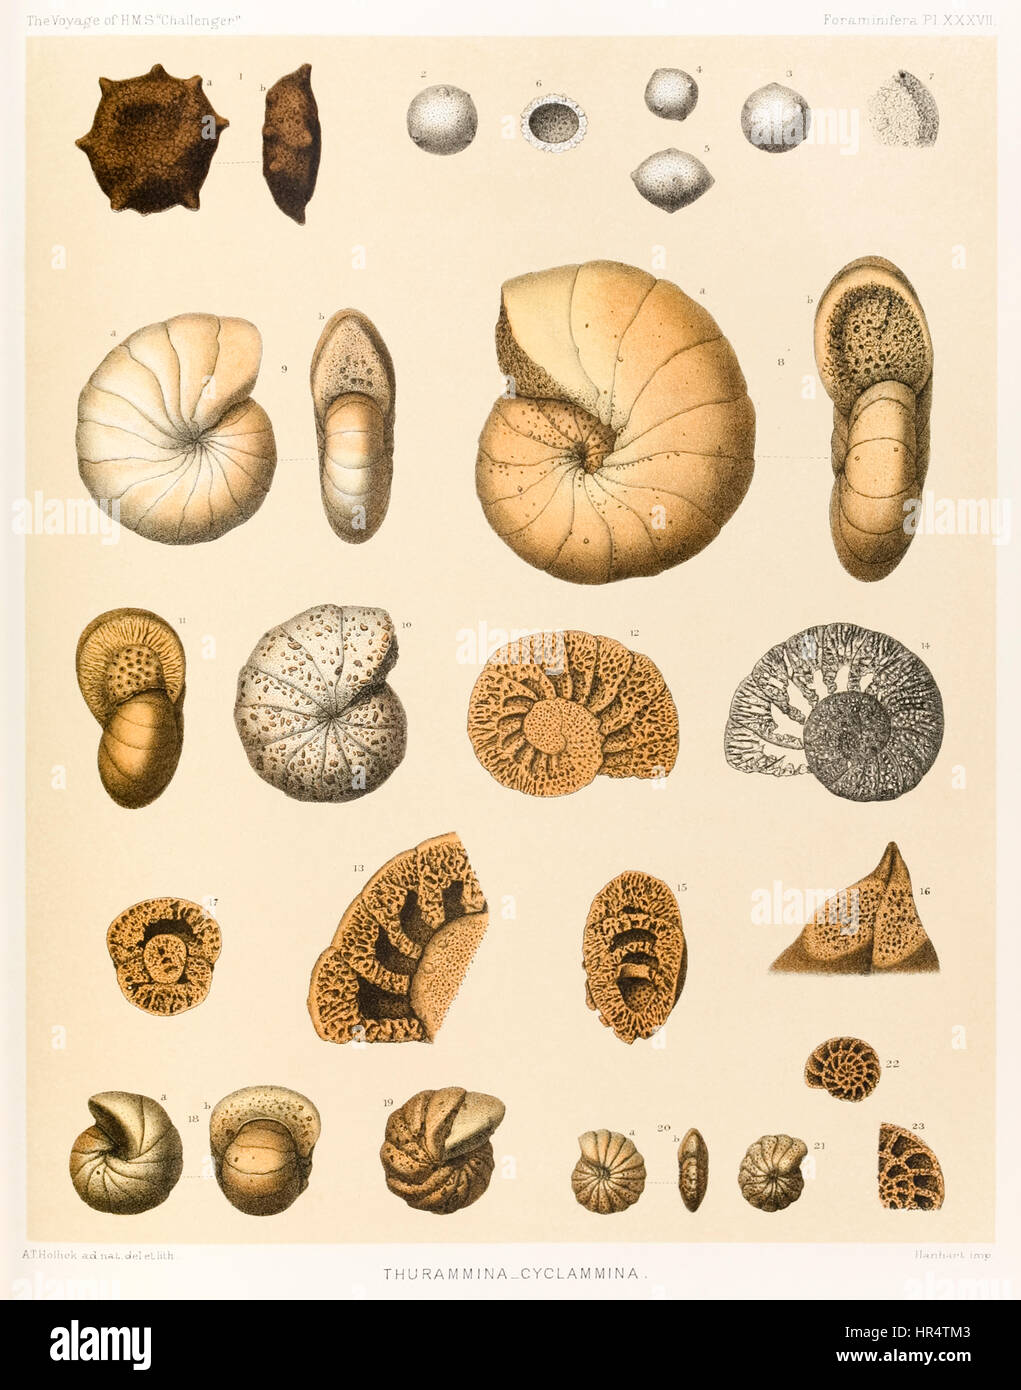 “Thurammina-Cyclammina (Foraminifera PL. XXXVII)” from ‘The Voyage of HMS “Challenger”1873-76’ published in 1884. Illustration by A.T. Hollick. Stock Photo